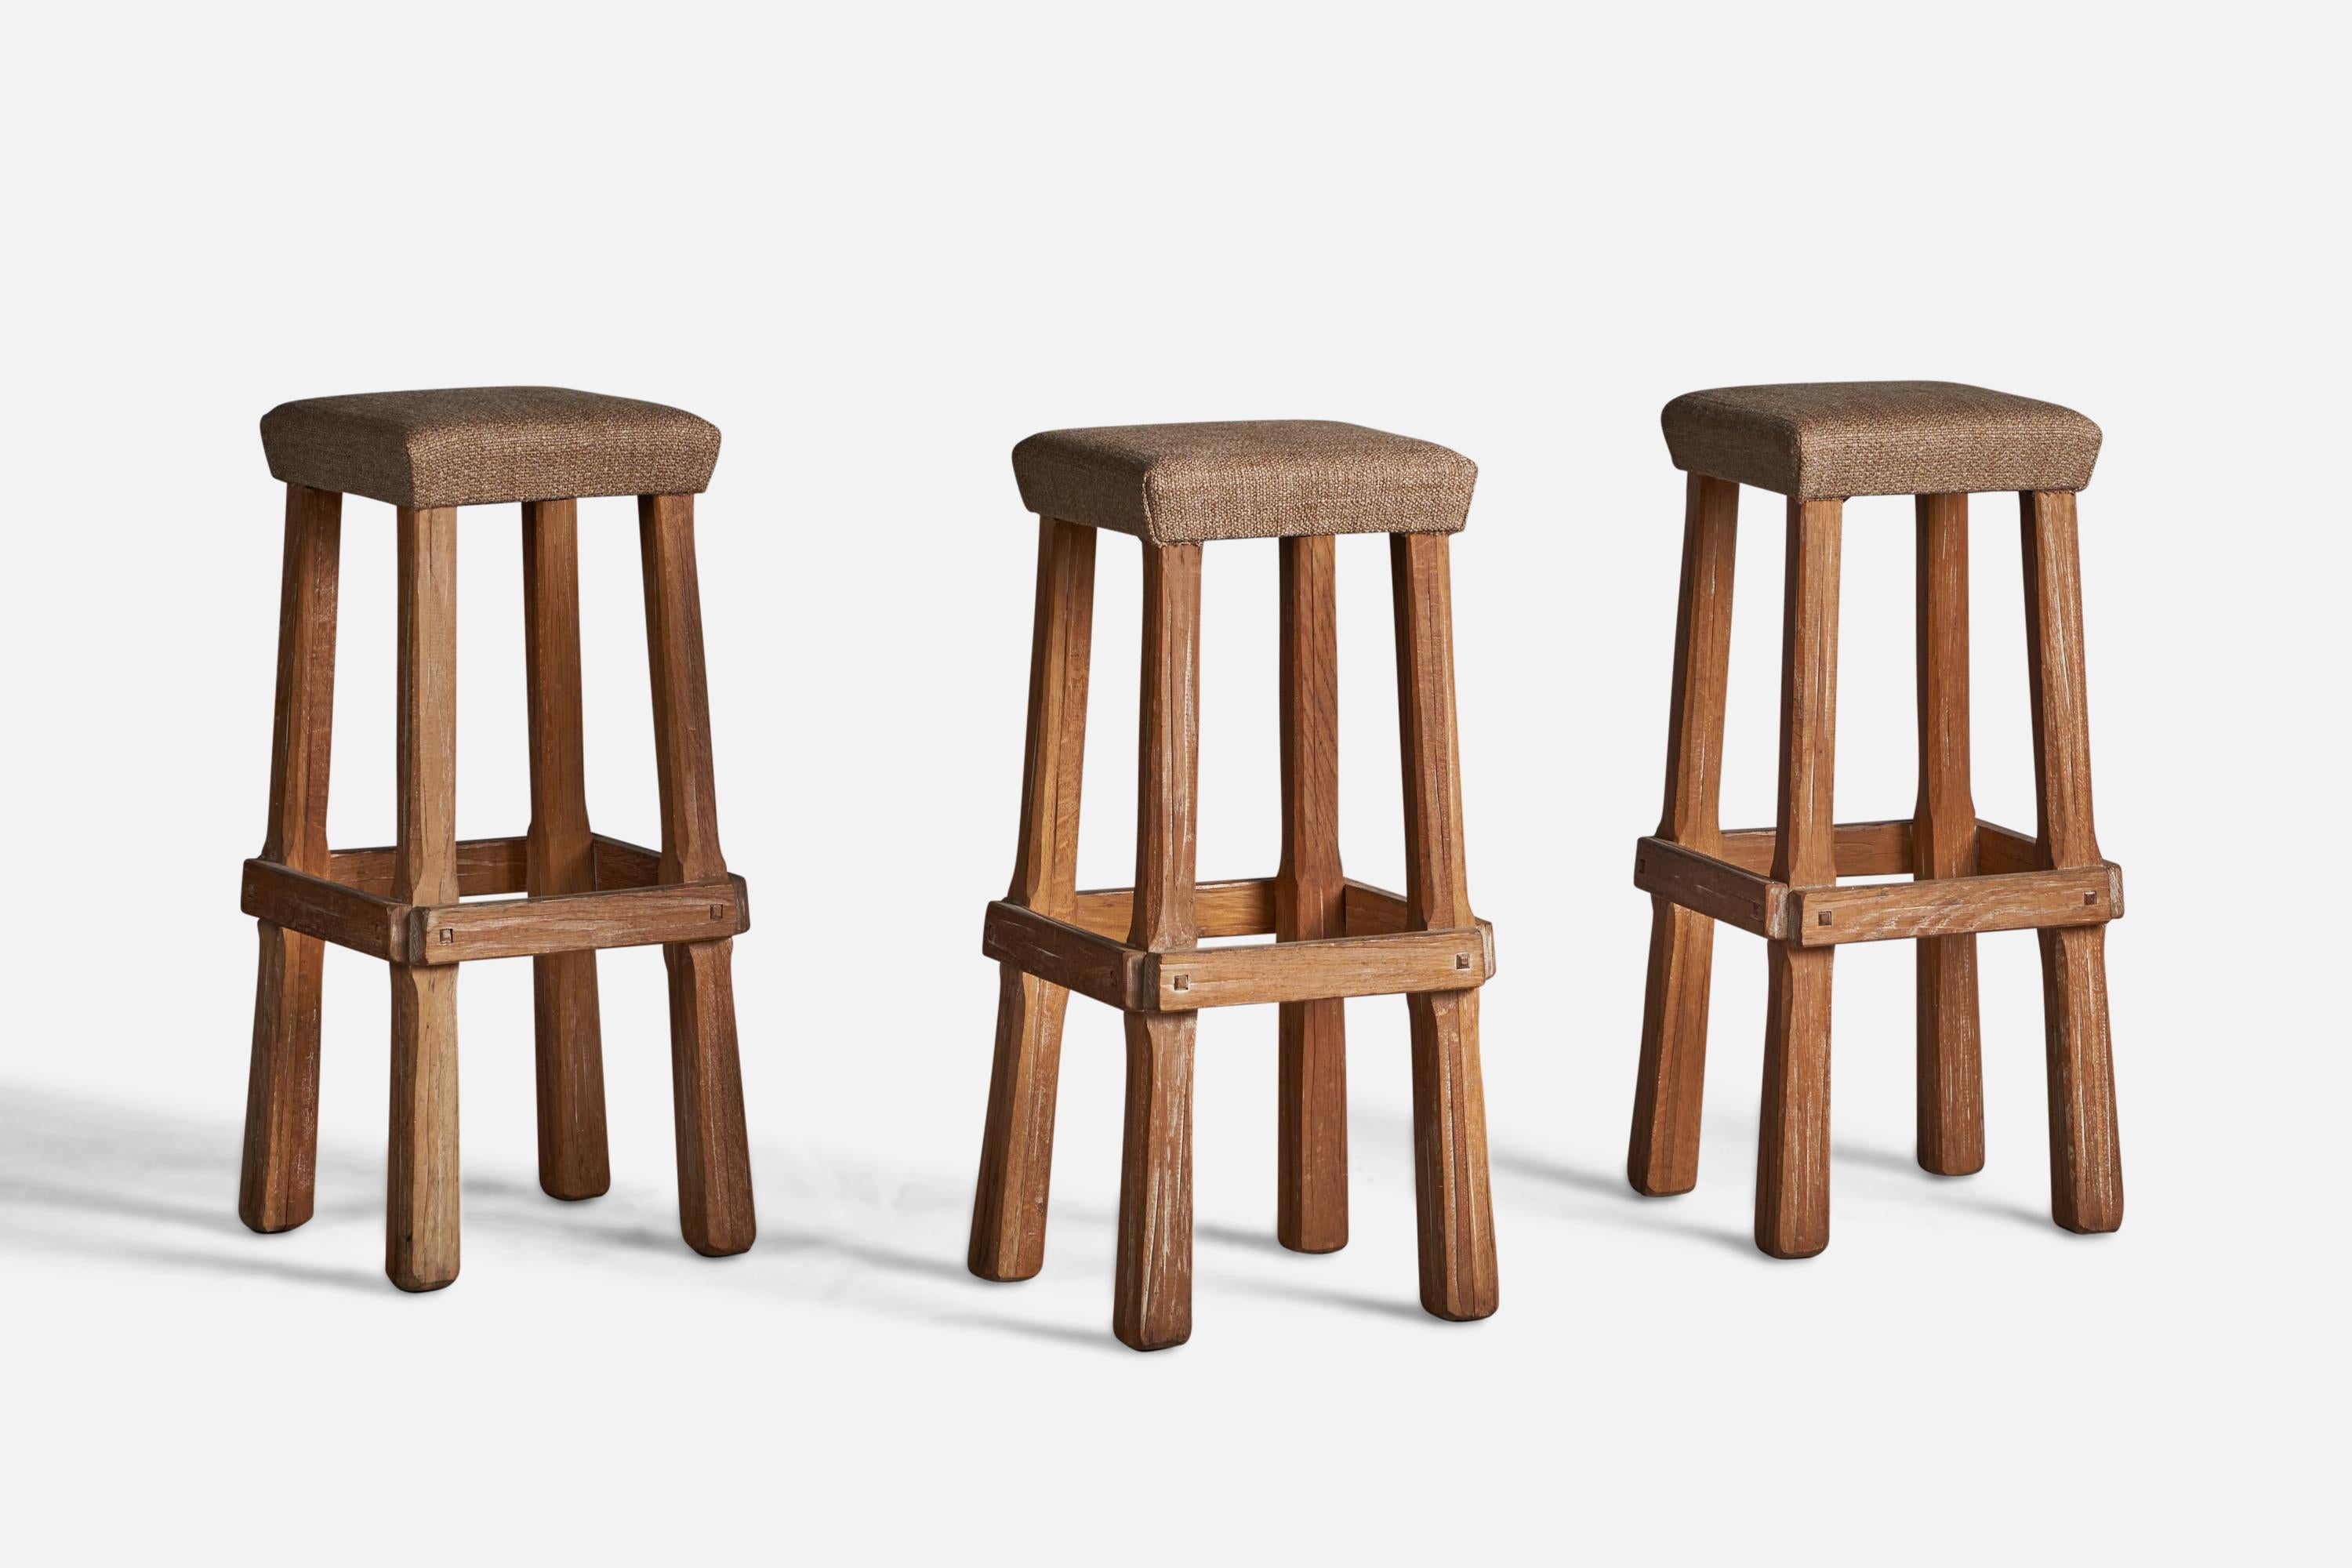 A set of 3 oak and beige fabric bar stools, designed and produced by A. Brandt Ranch Oak, USA, c. 1950s.